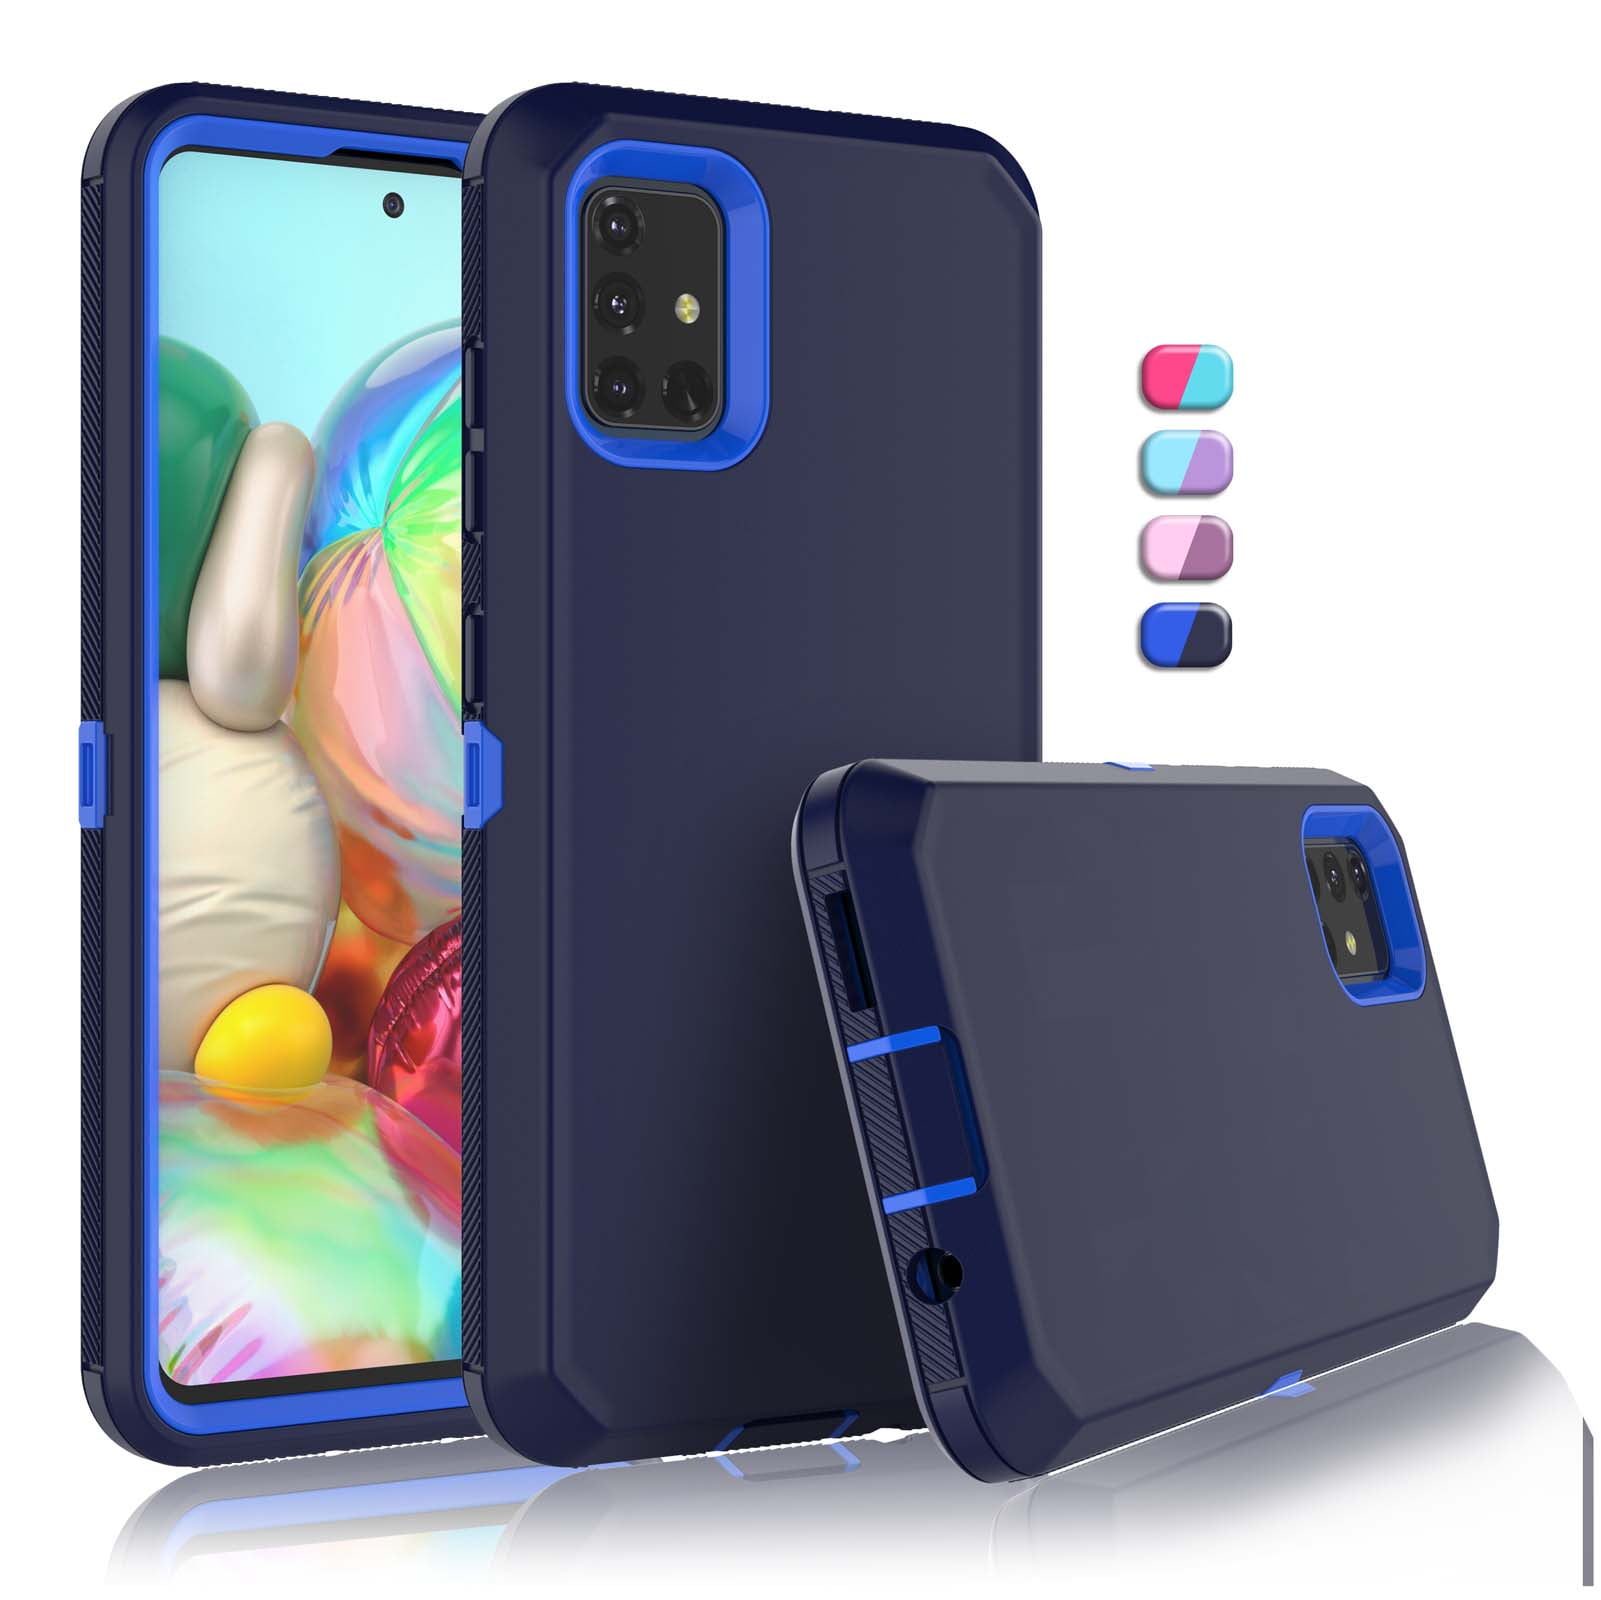 Galaxy A51 4G Cases, Sturdy Phone Case for Samsung Galaxy A51 4G 6.5", Tekcoo Full-Body Shockproof Protection Heavy Duty Armor Hard Plastic & Shock Absorption Rubber Bumper 3-in-1 Case Cover -